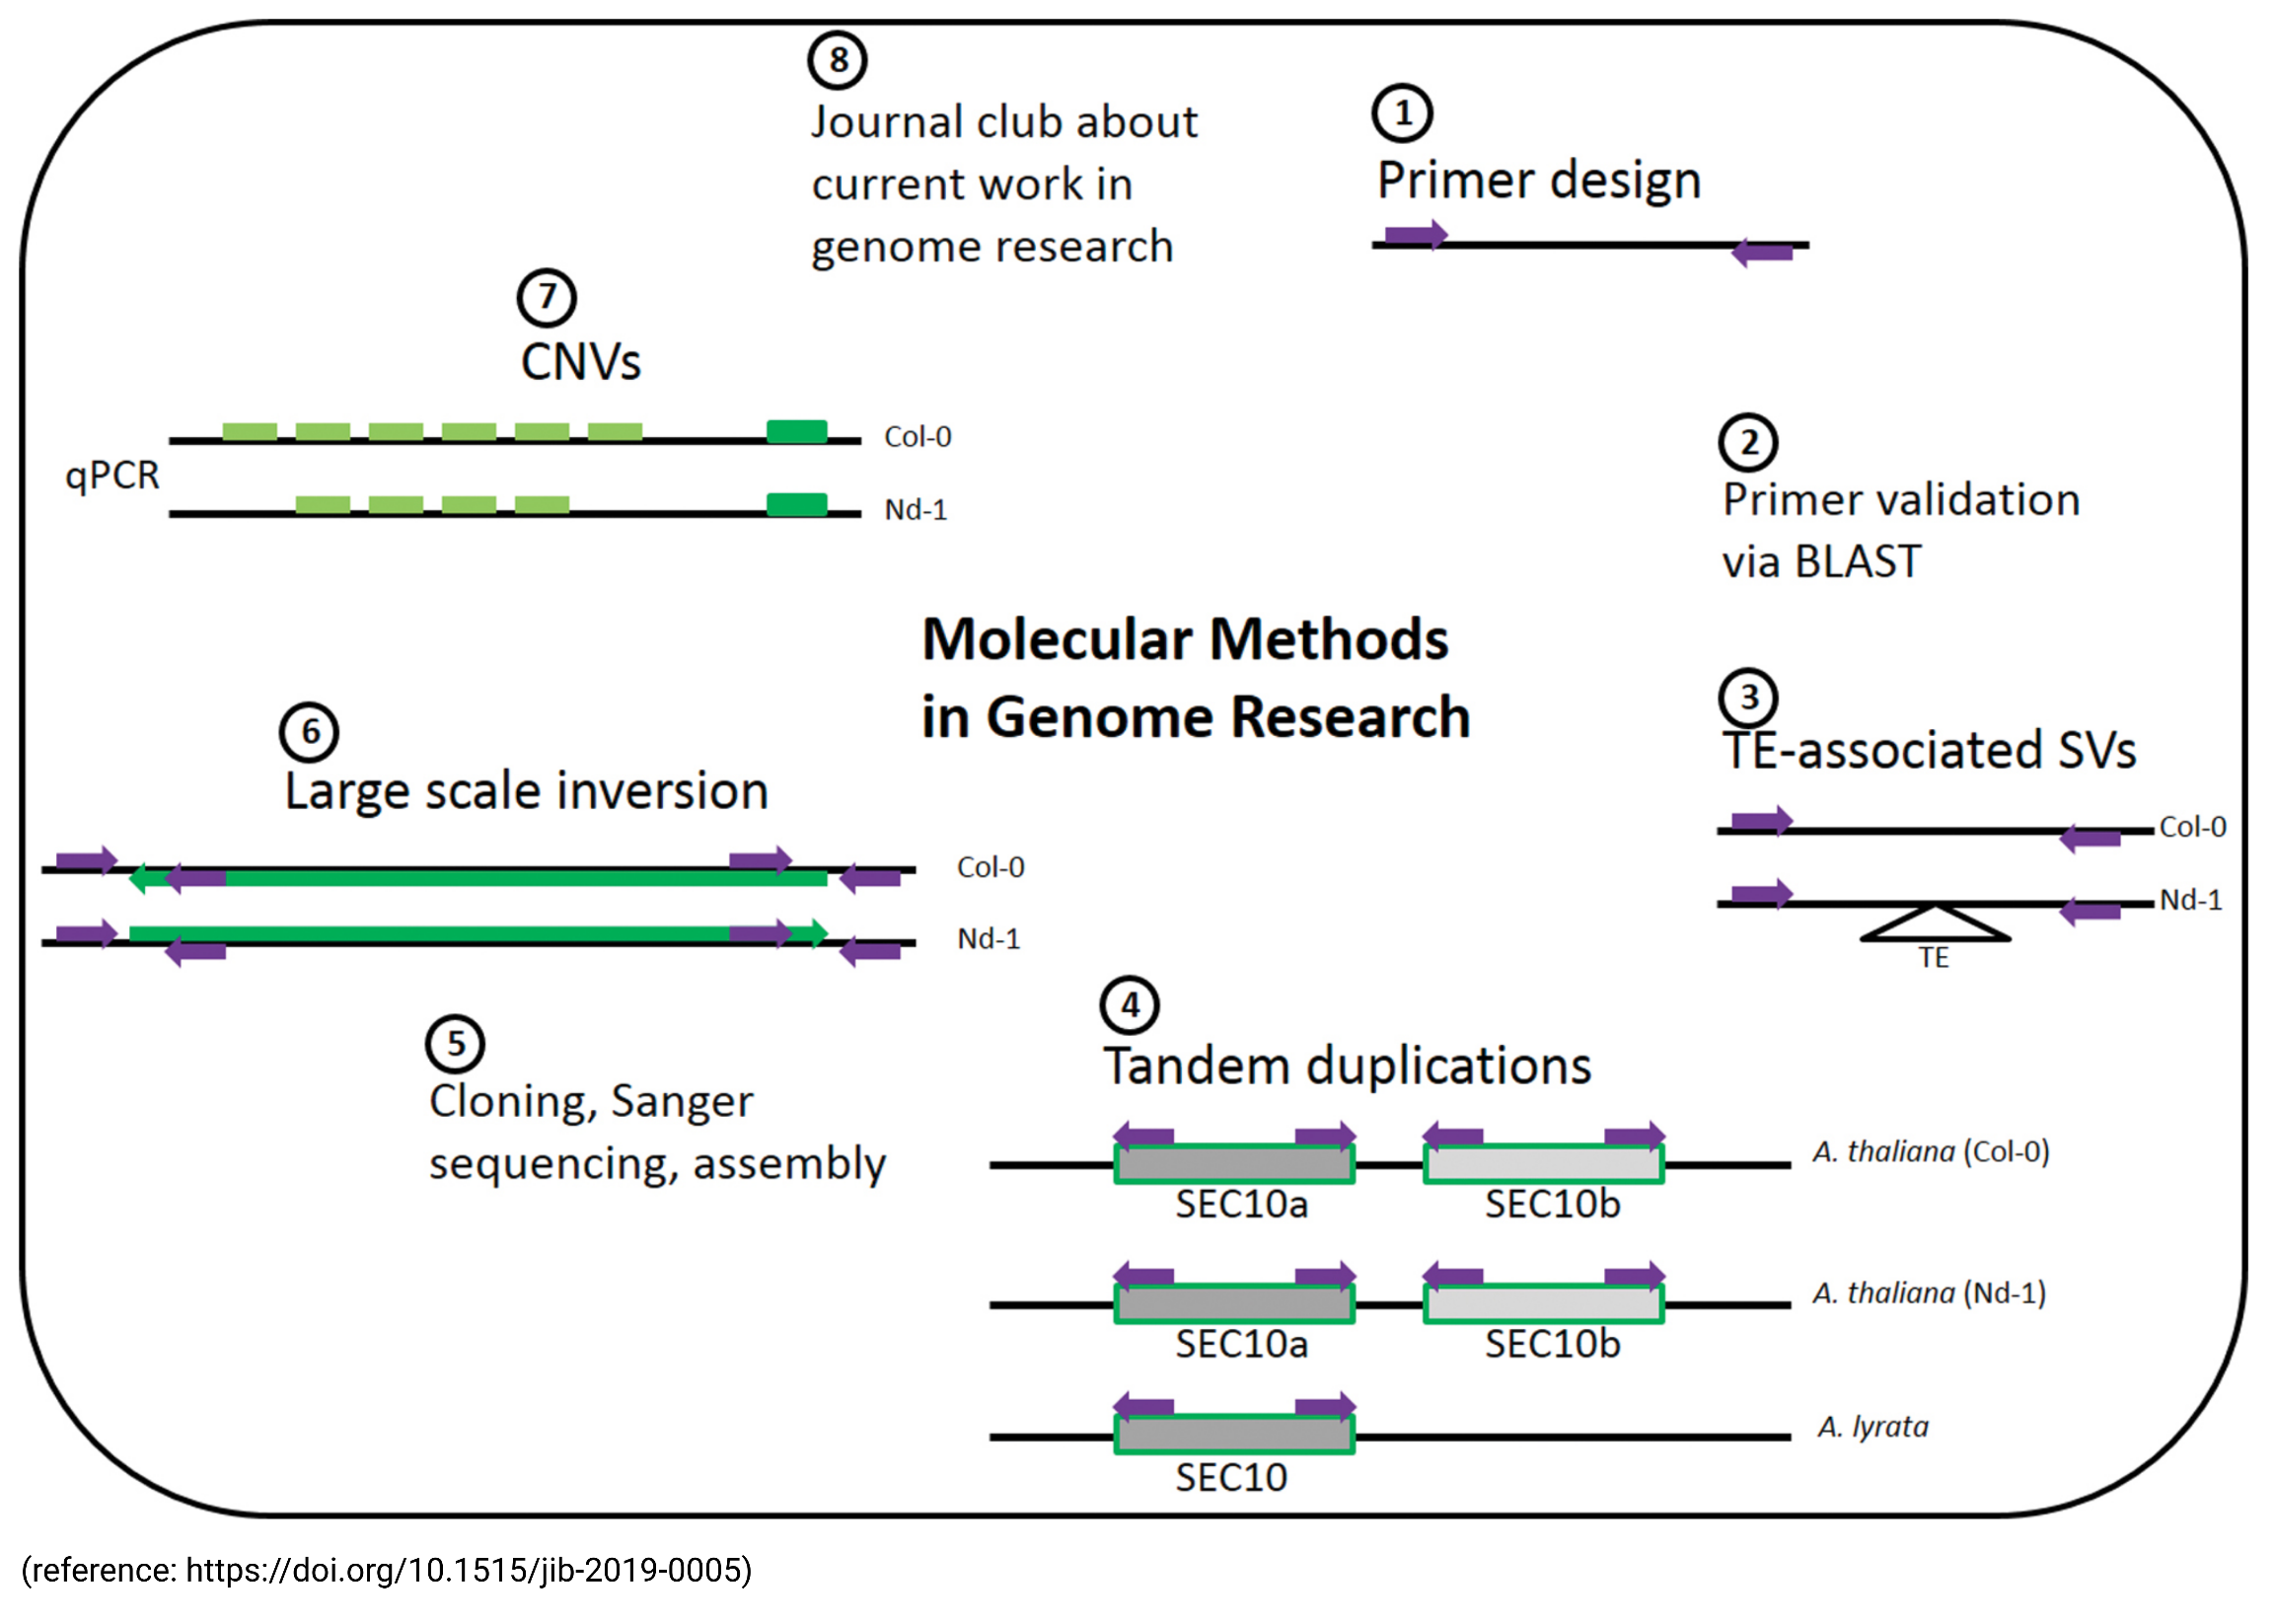 Molecular Methods in Genome Research course content overview